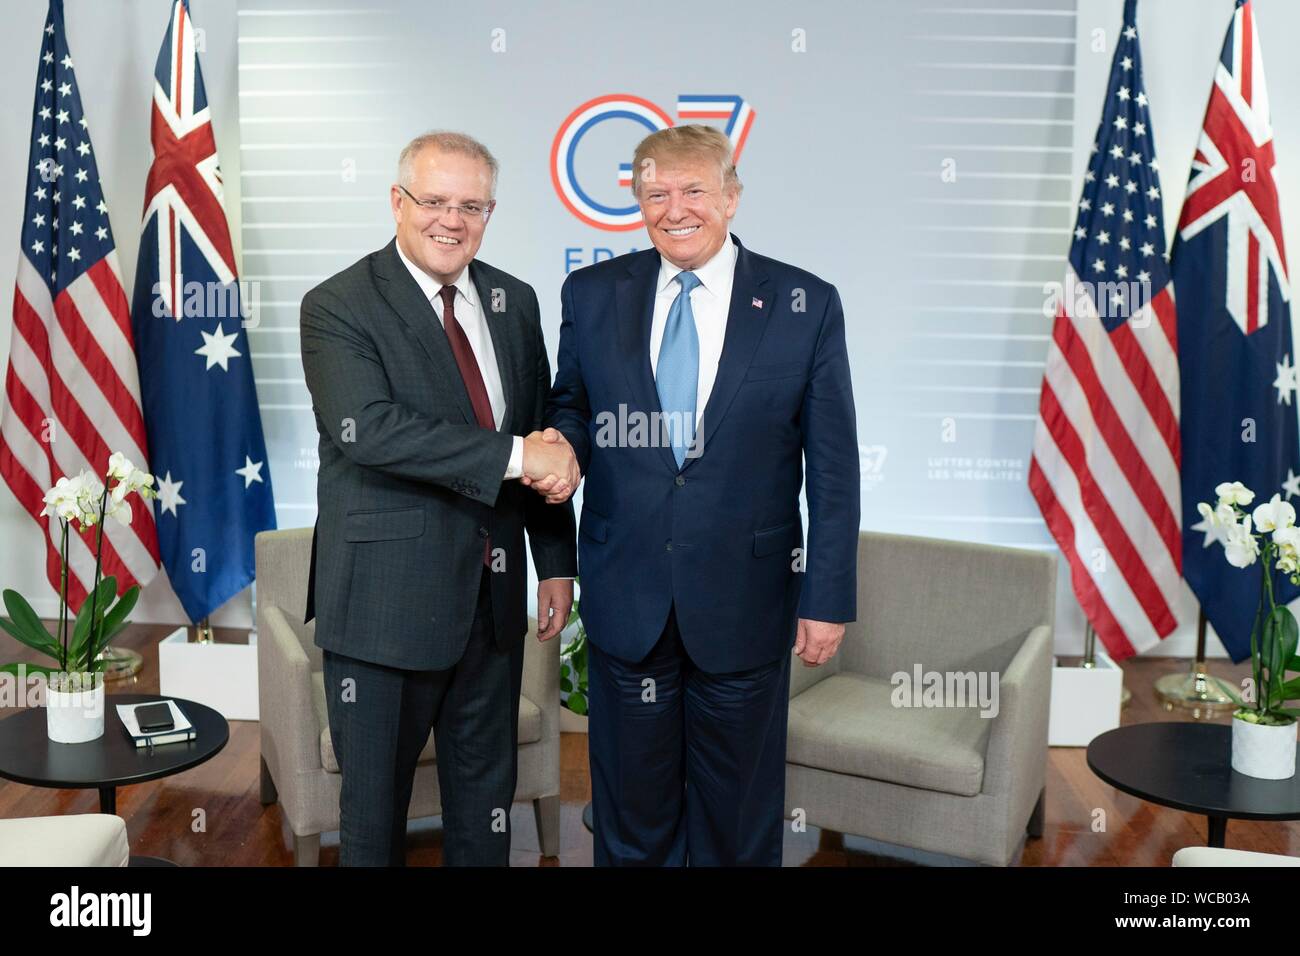 U.S. President Donald Trump shakes hands with Australian Prime Minister Scott Morrison, left, prior to their bilateral meeting on the sidelines of the G7 Summit at the Centre de Congrés Bellevue August 25, 2019 in Biarritz, France. Stock Photo